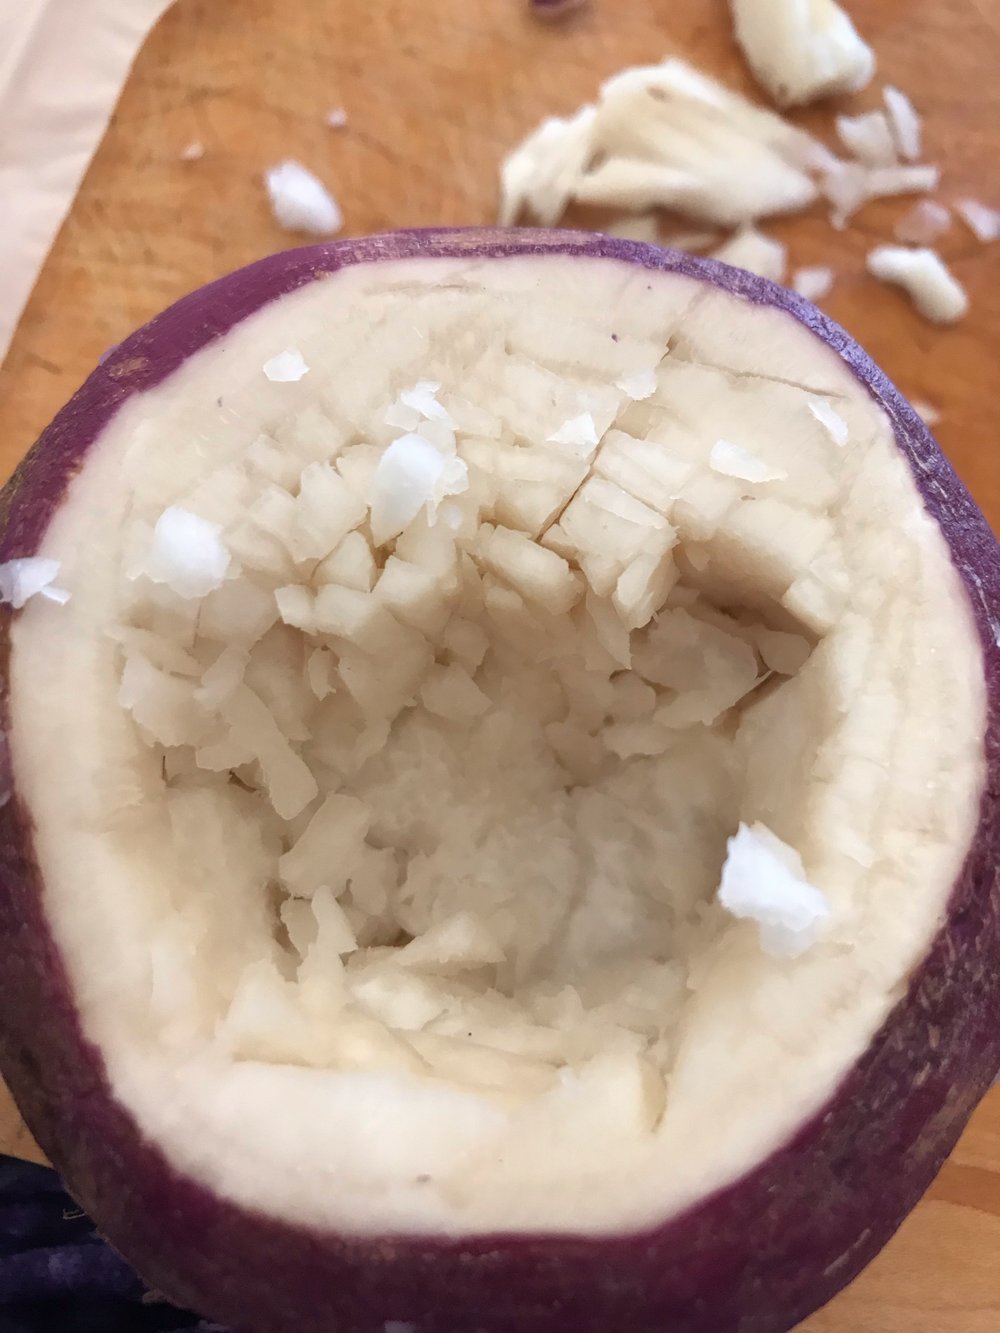 Carving Out The Turnip 